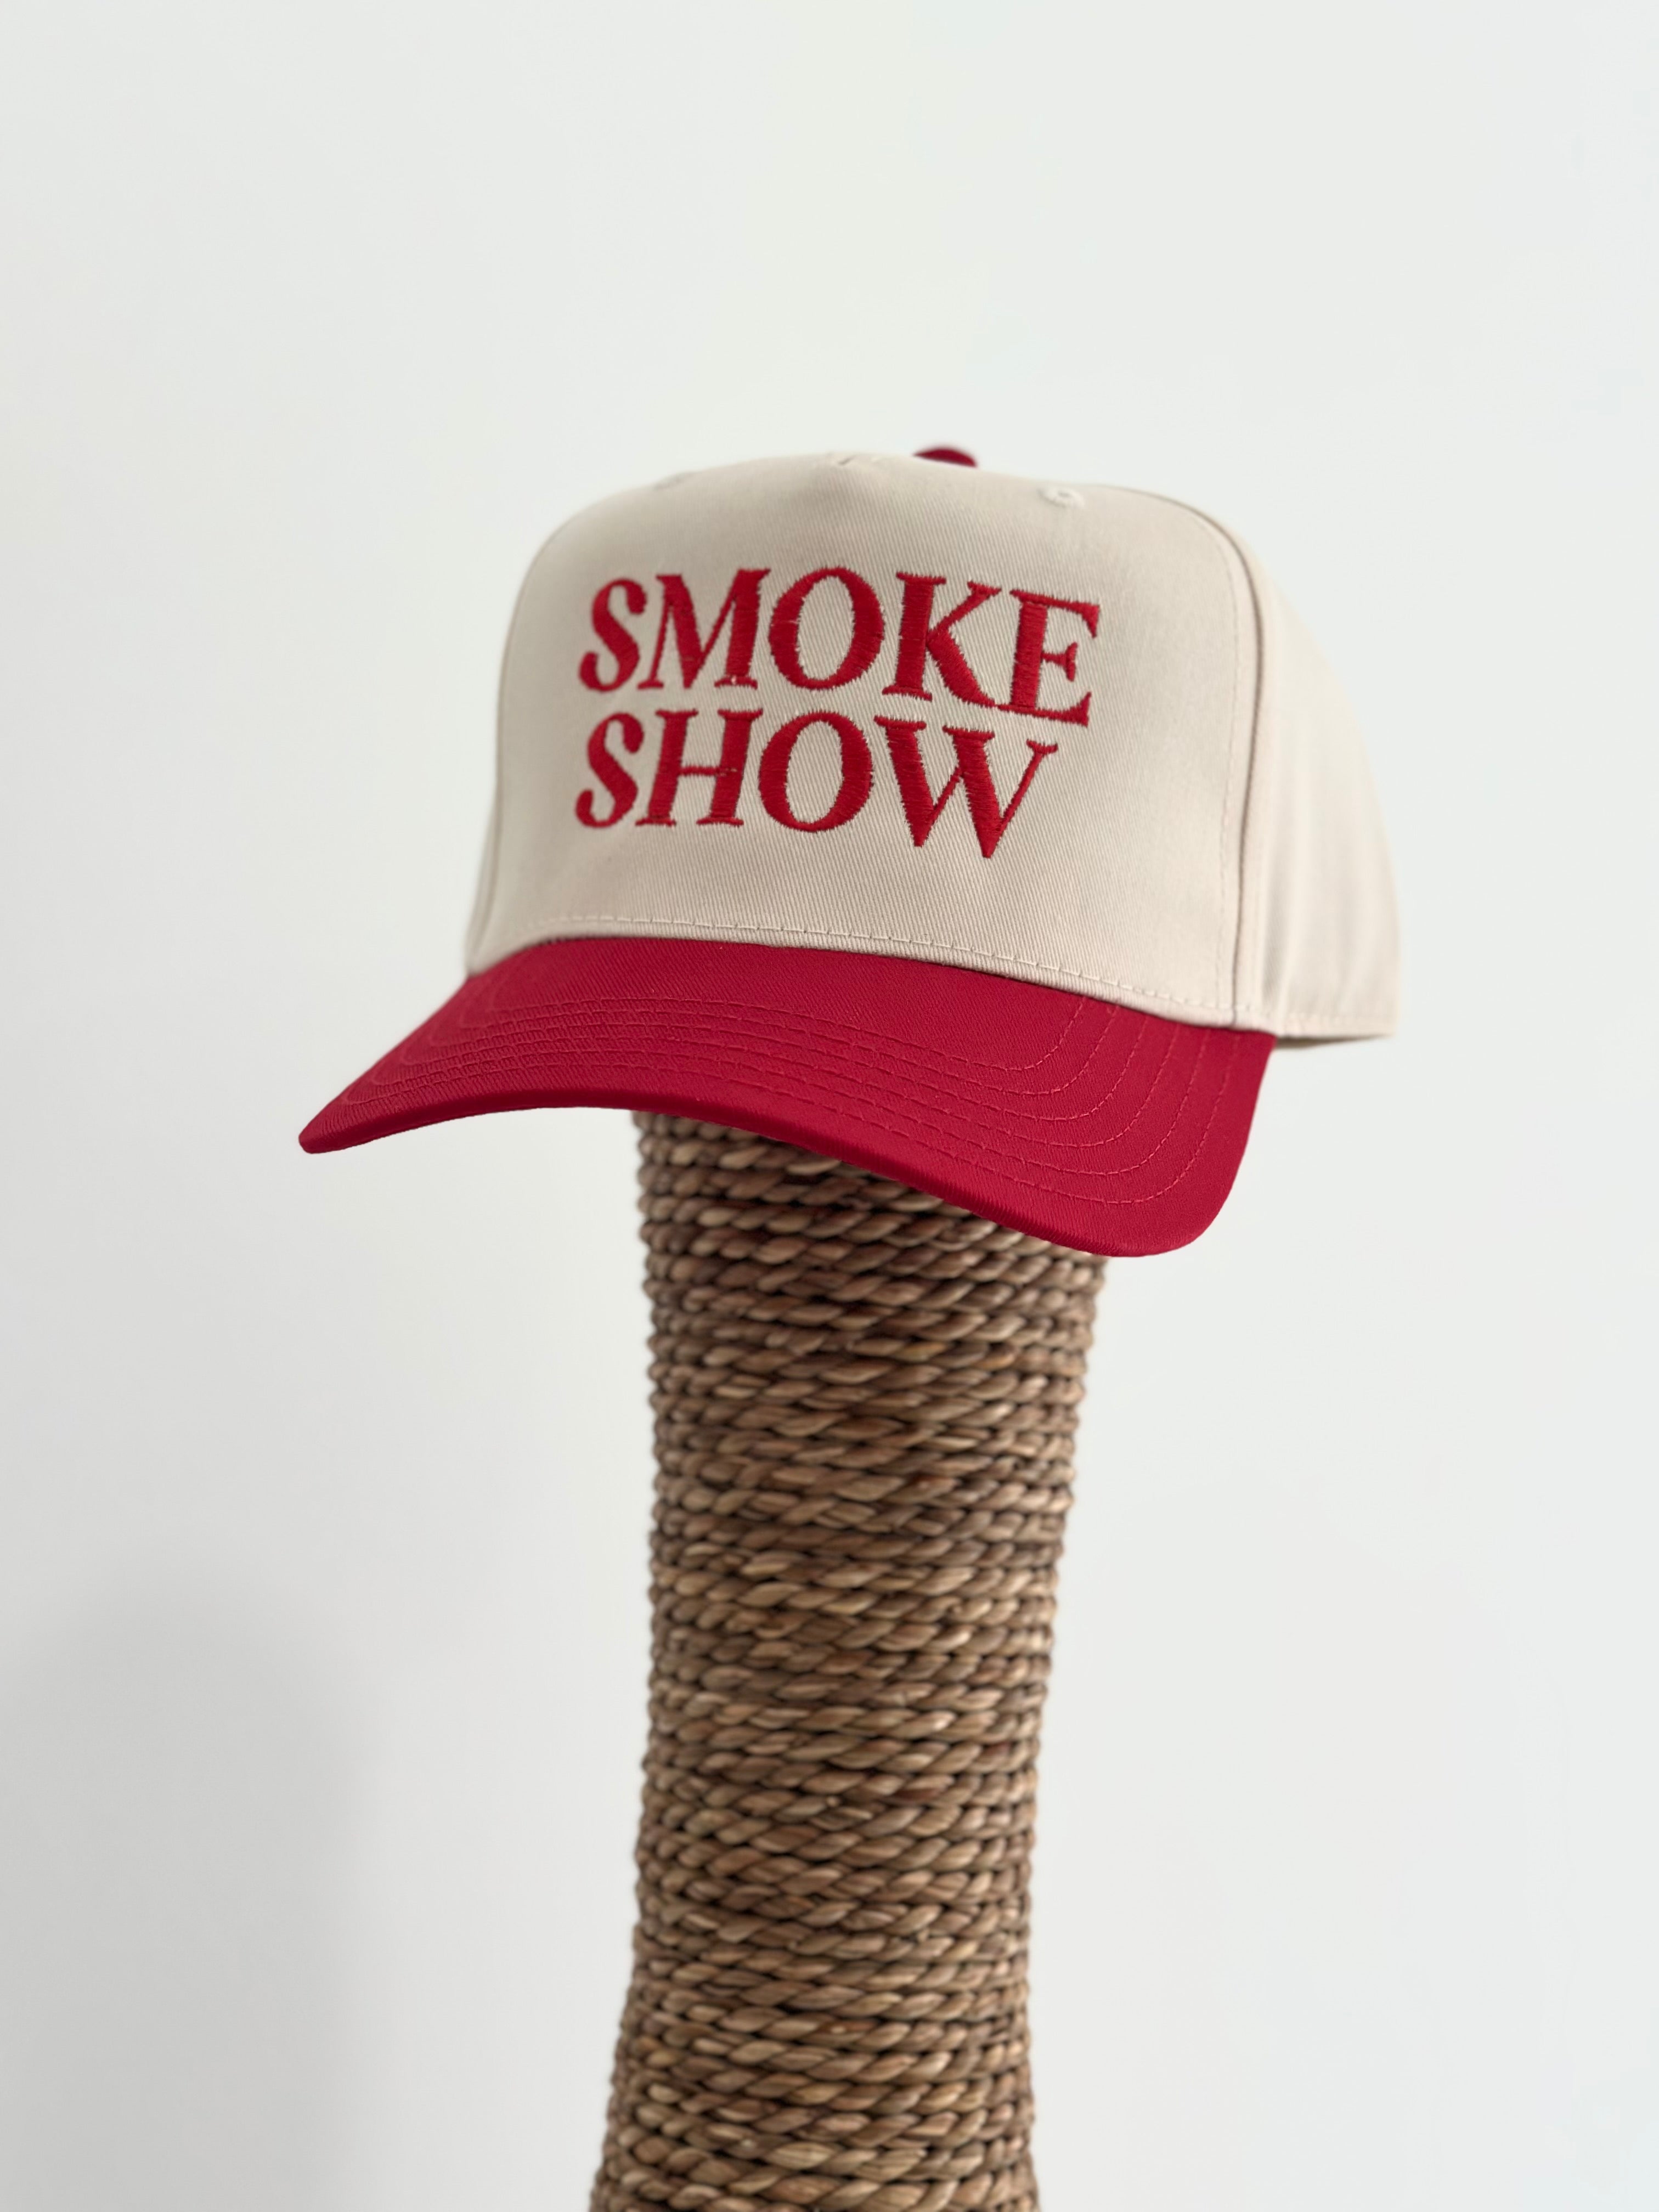 Smokeshow Embroidered Hat